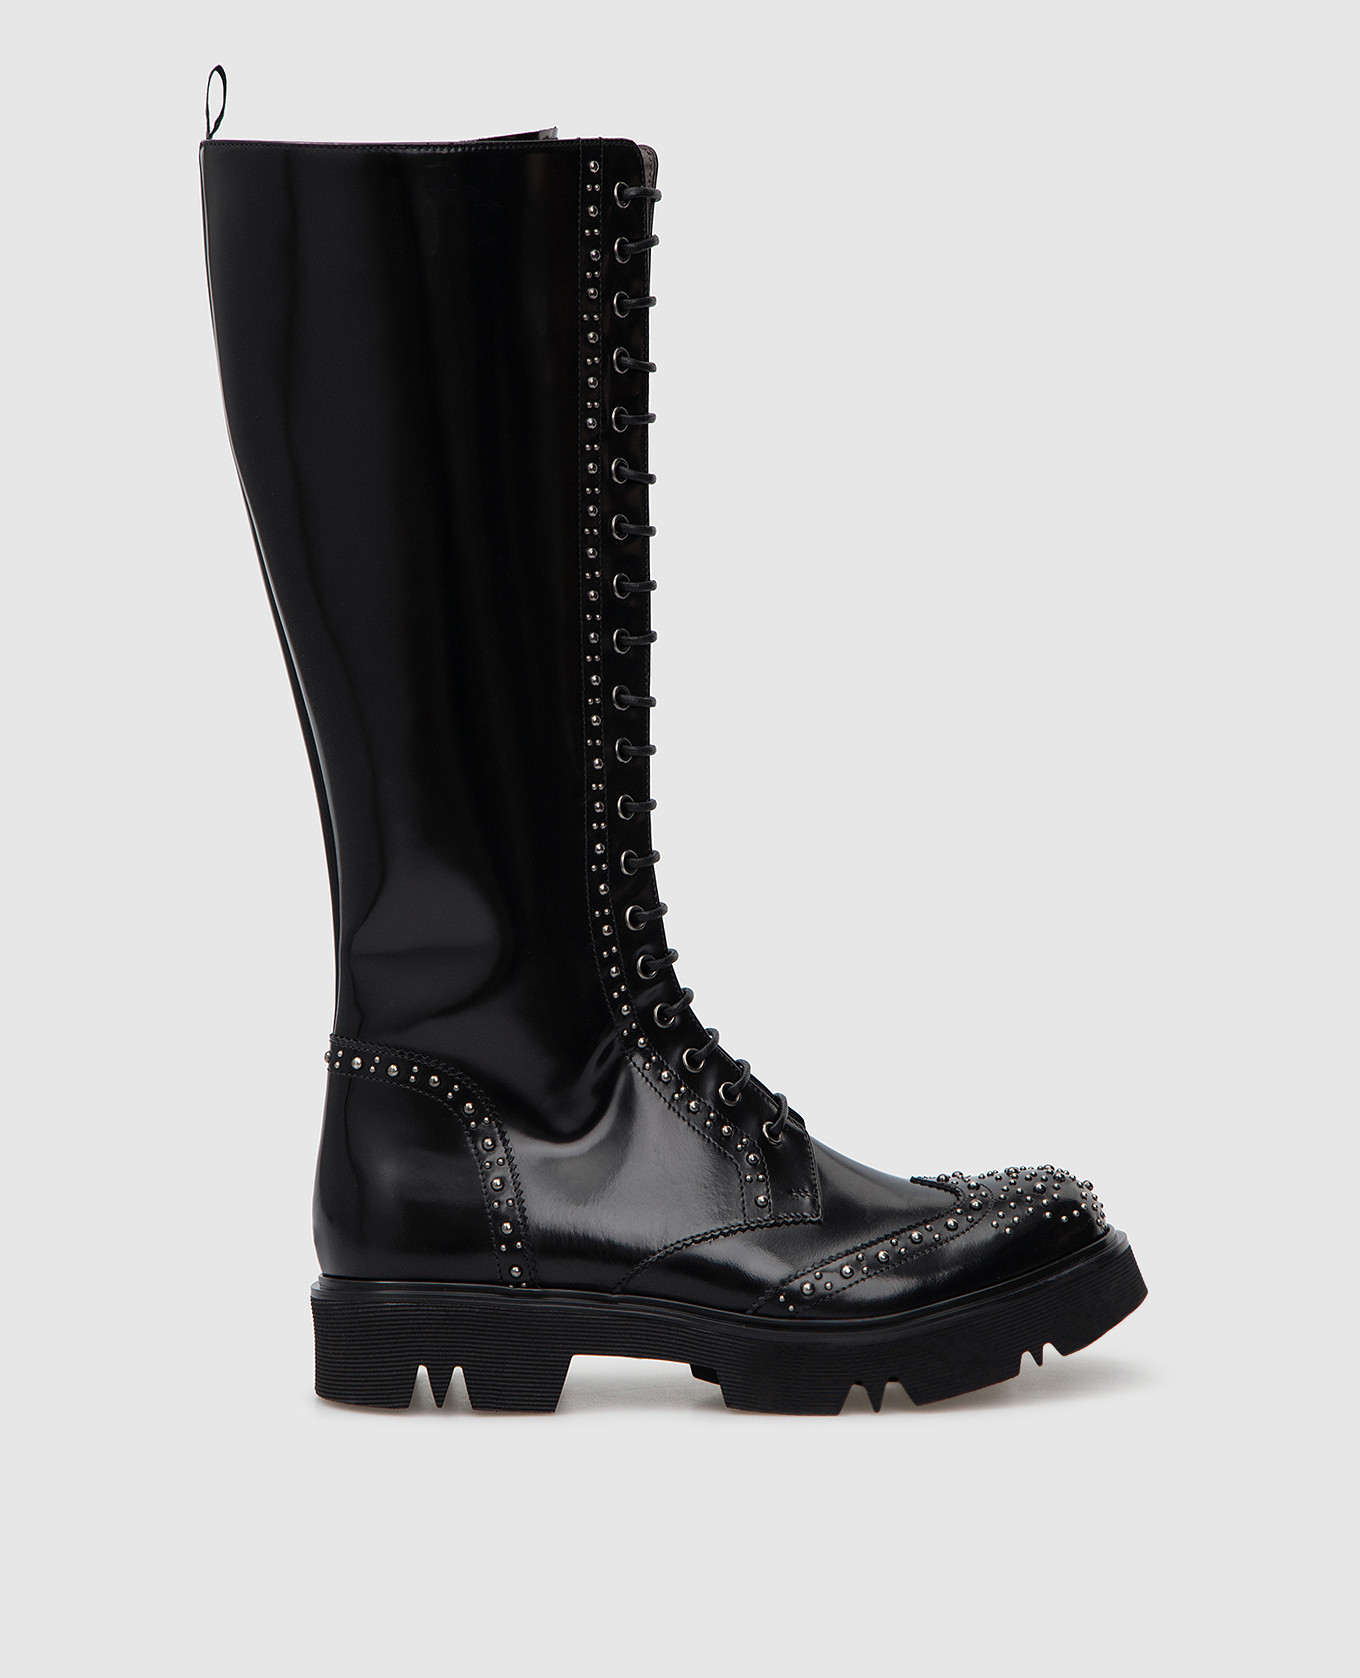 Icarus black leather studded boots